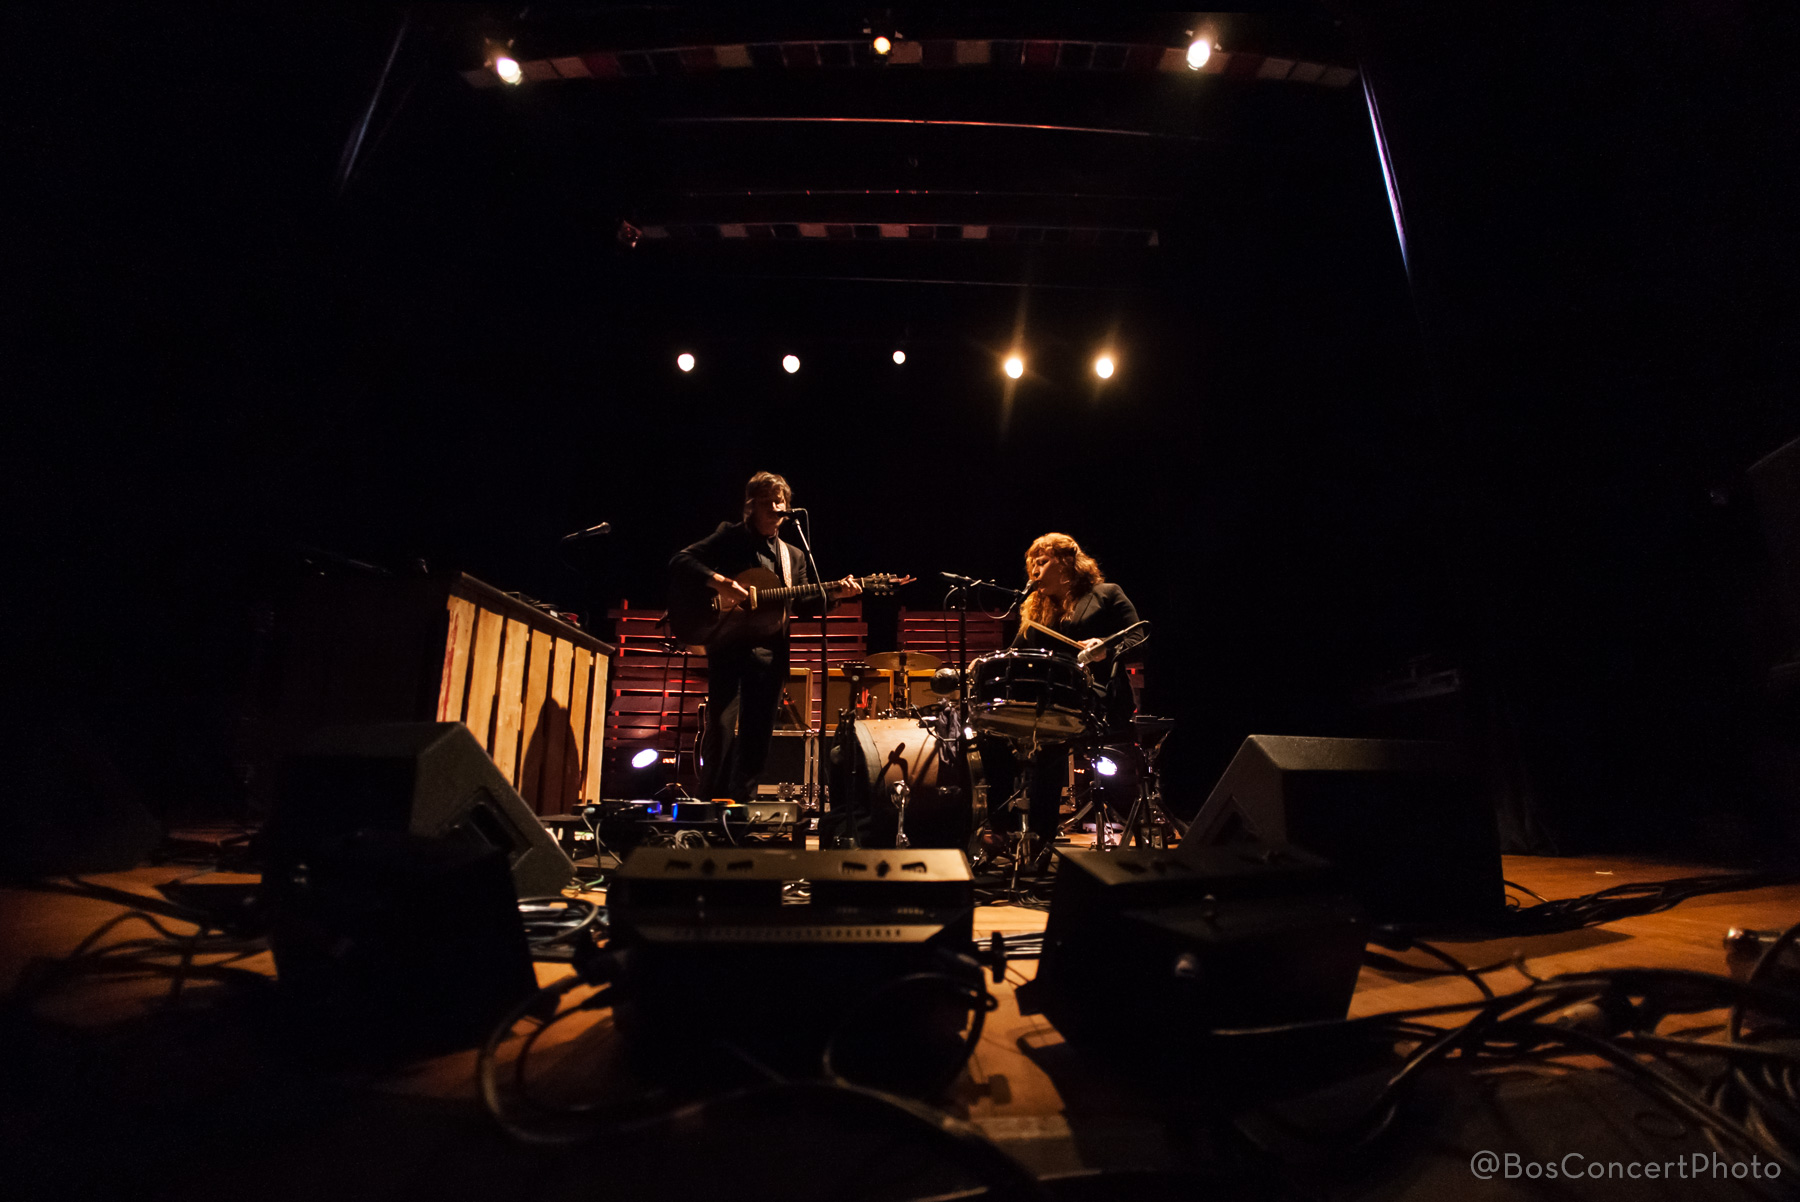 Photos | An Evening with Shovels & Rope @ Columbus Theatre